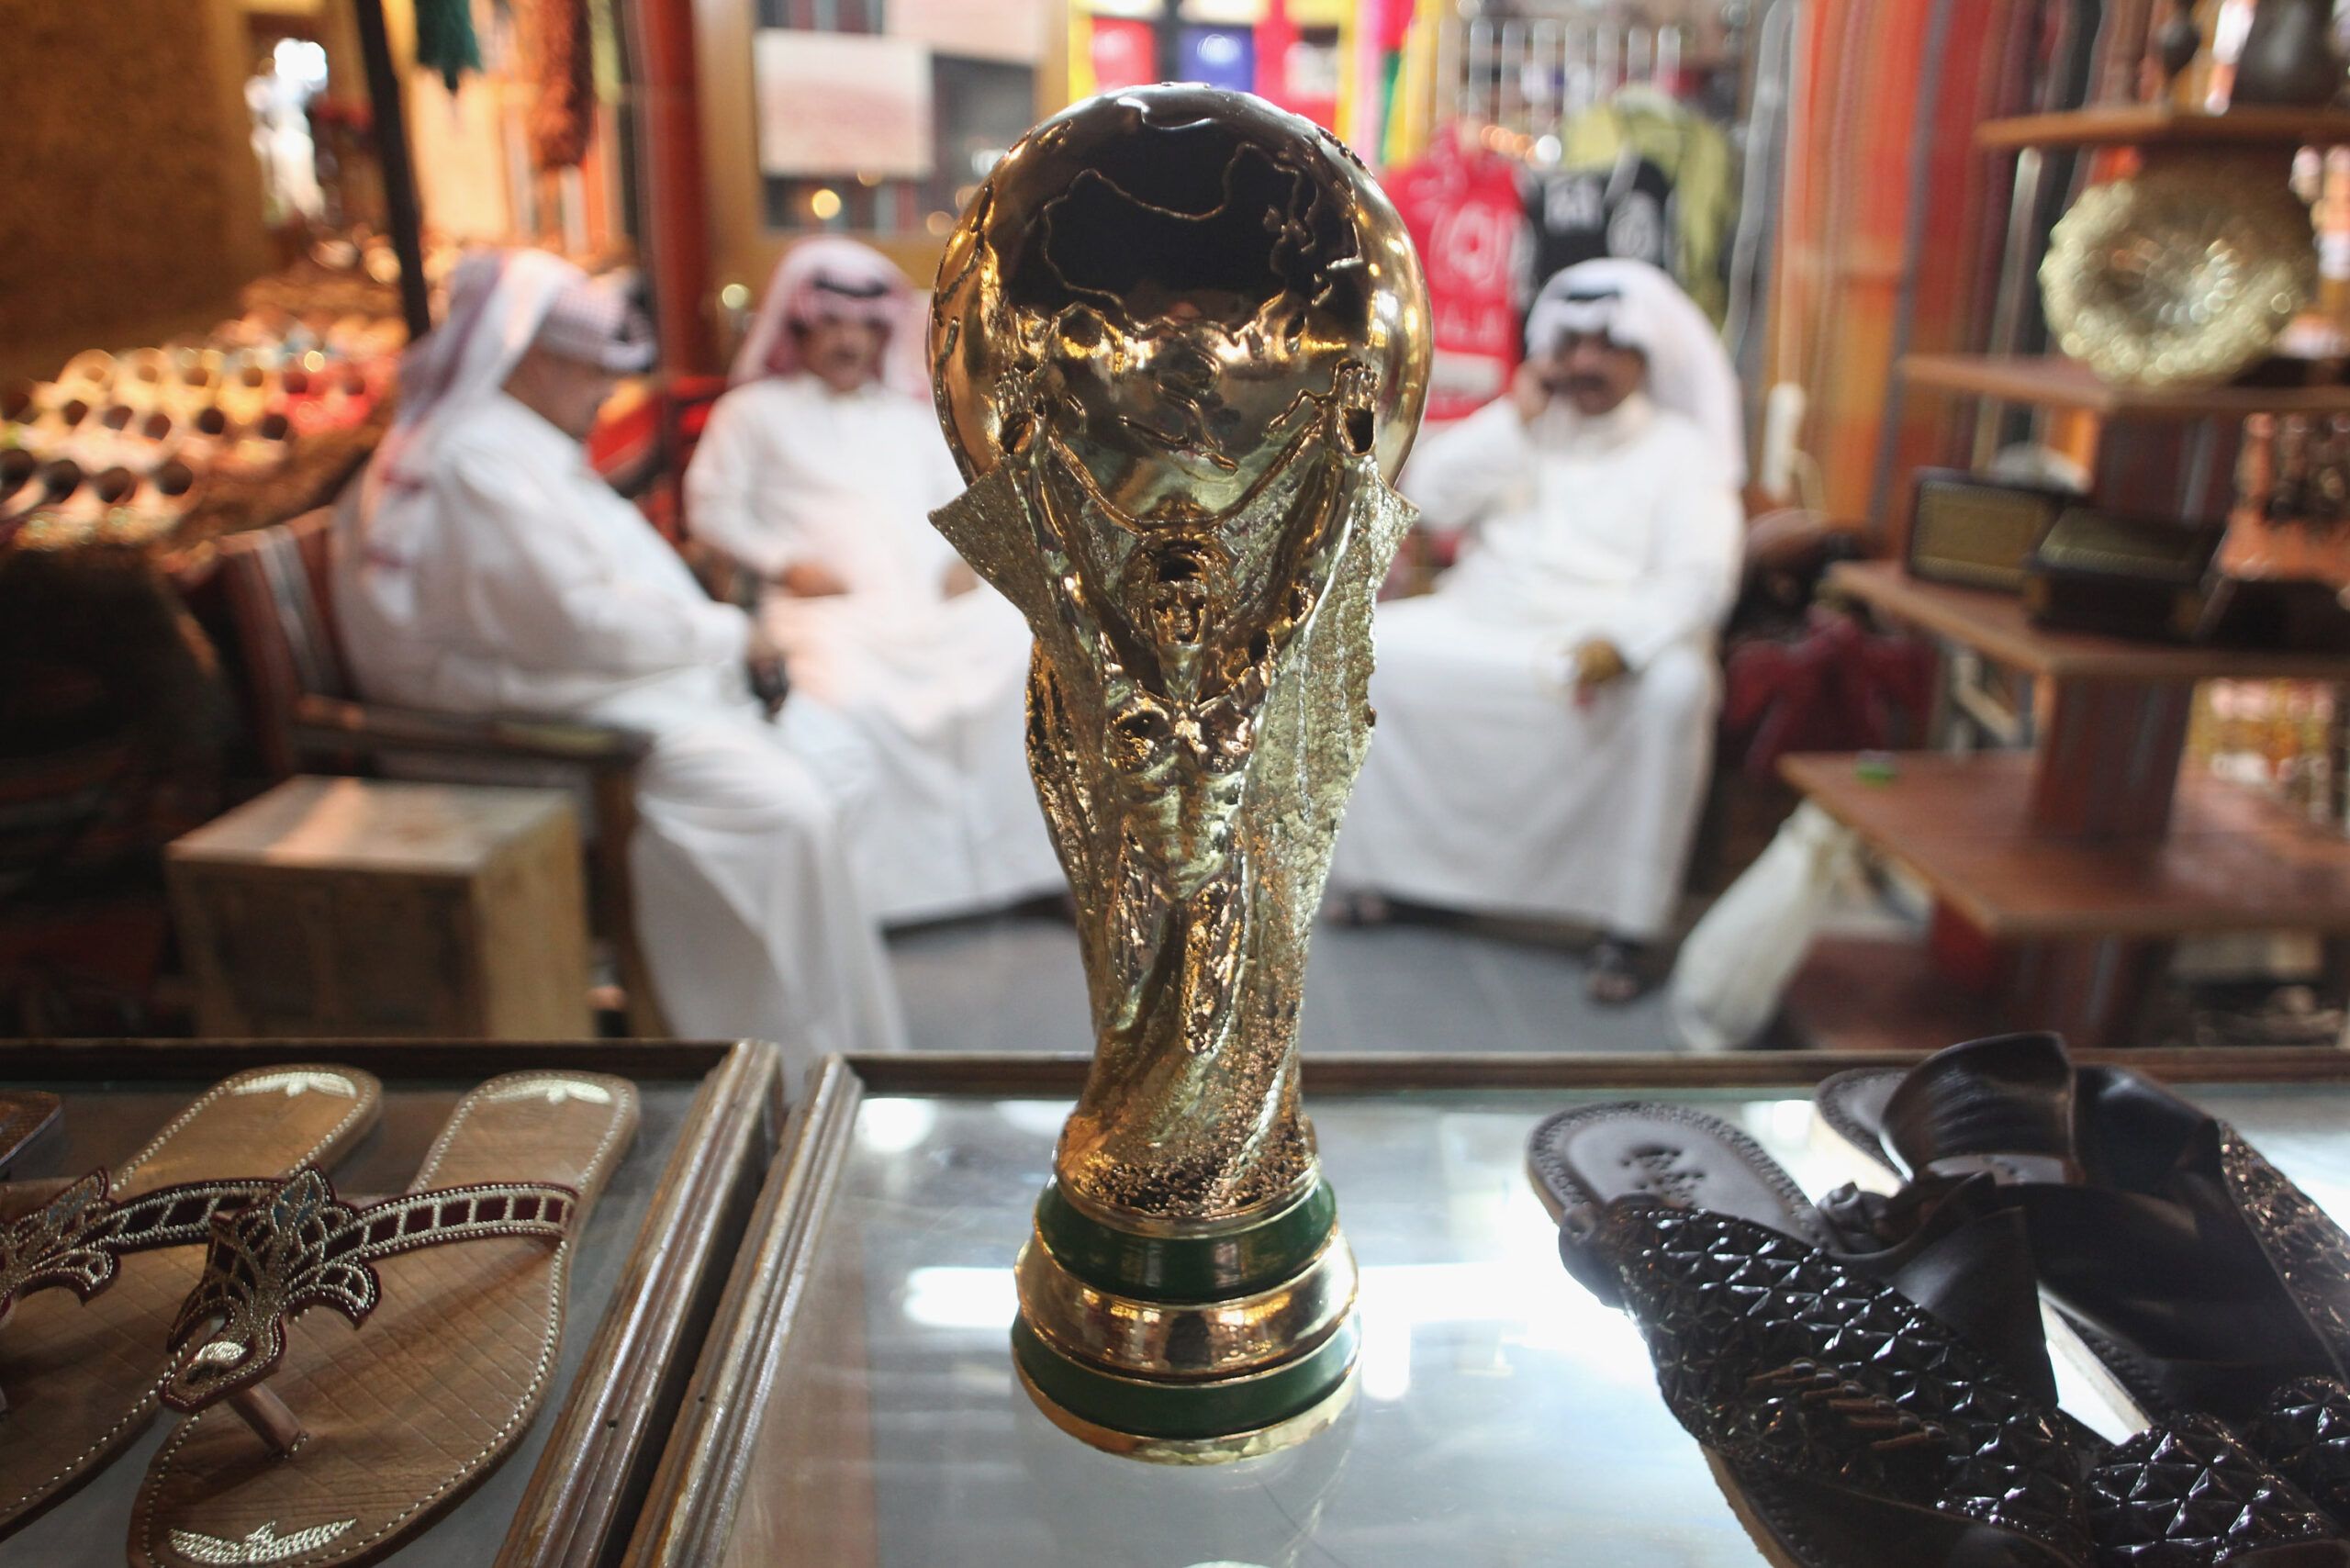 The World Cup trophy in Qatar